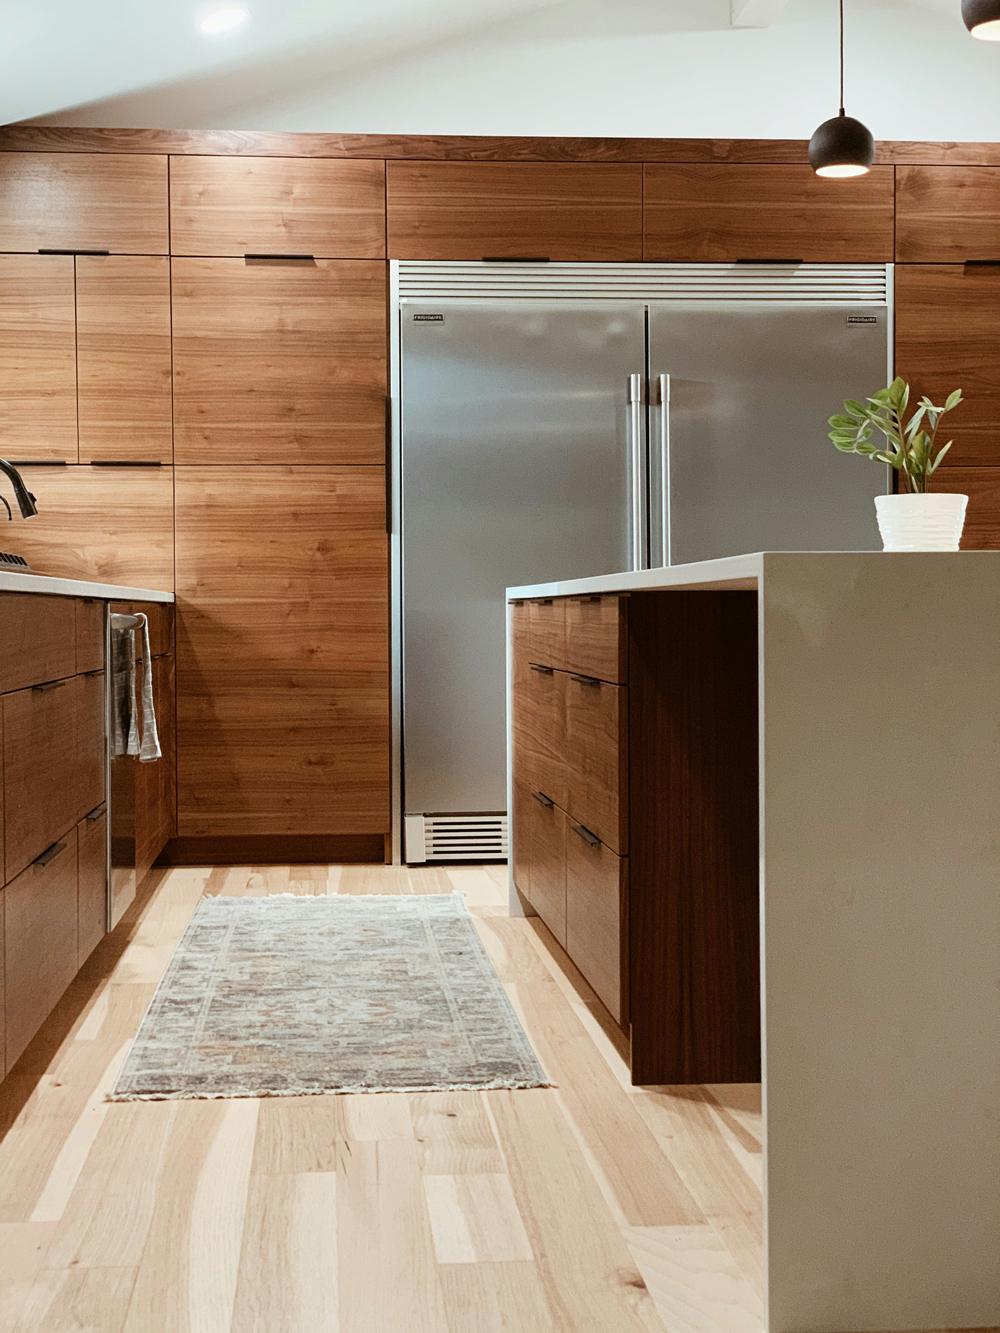 Why Laminate Kitchens are a Sustainable Choice